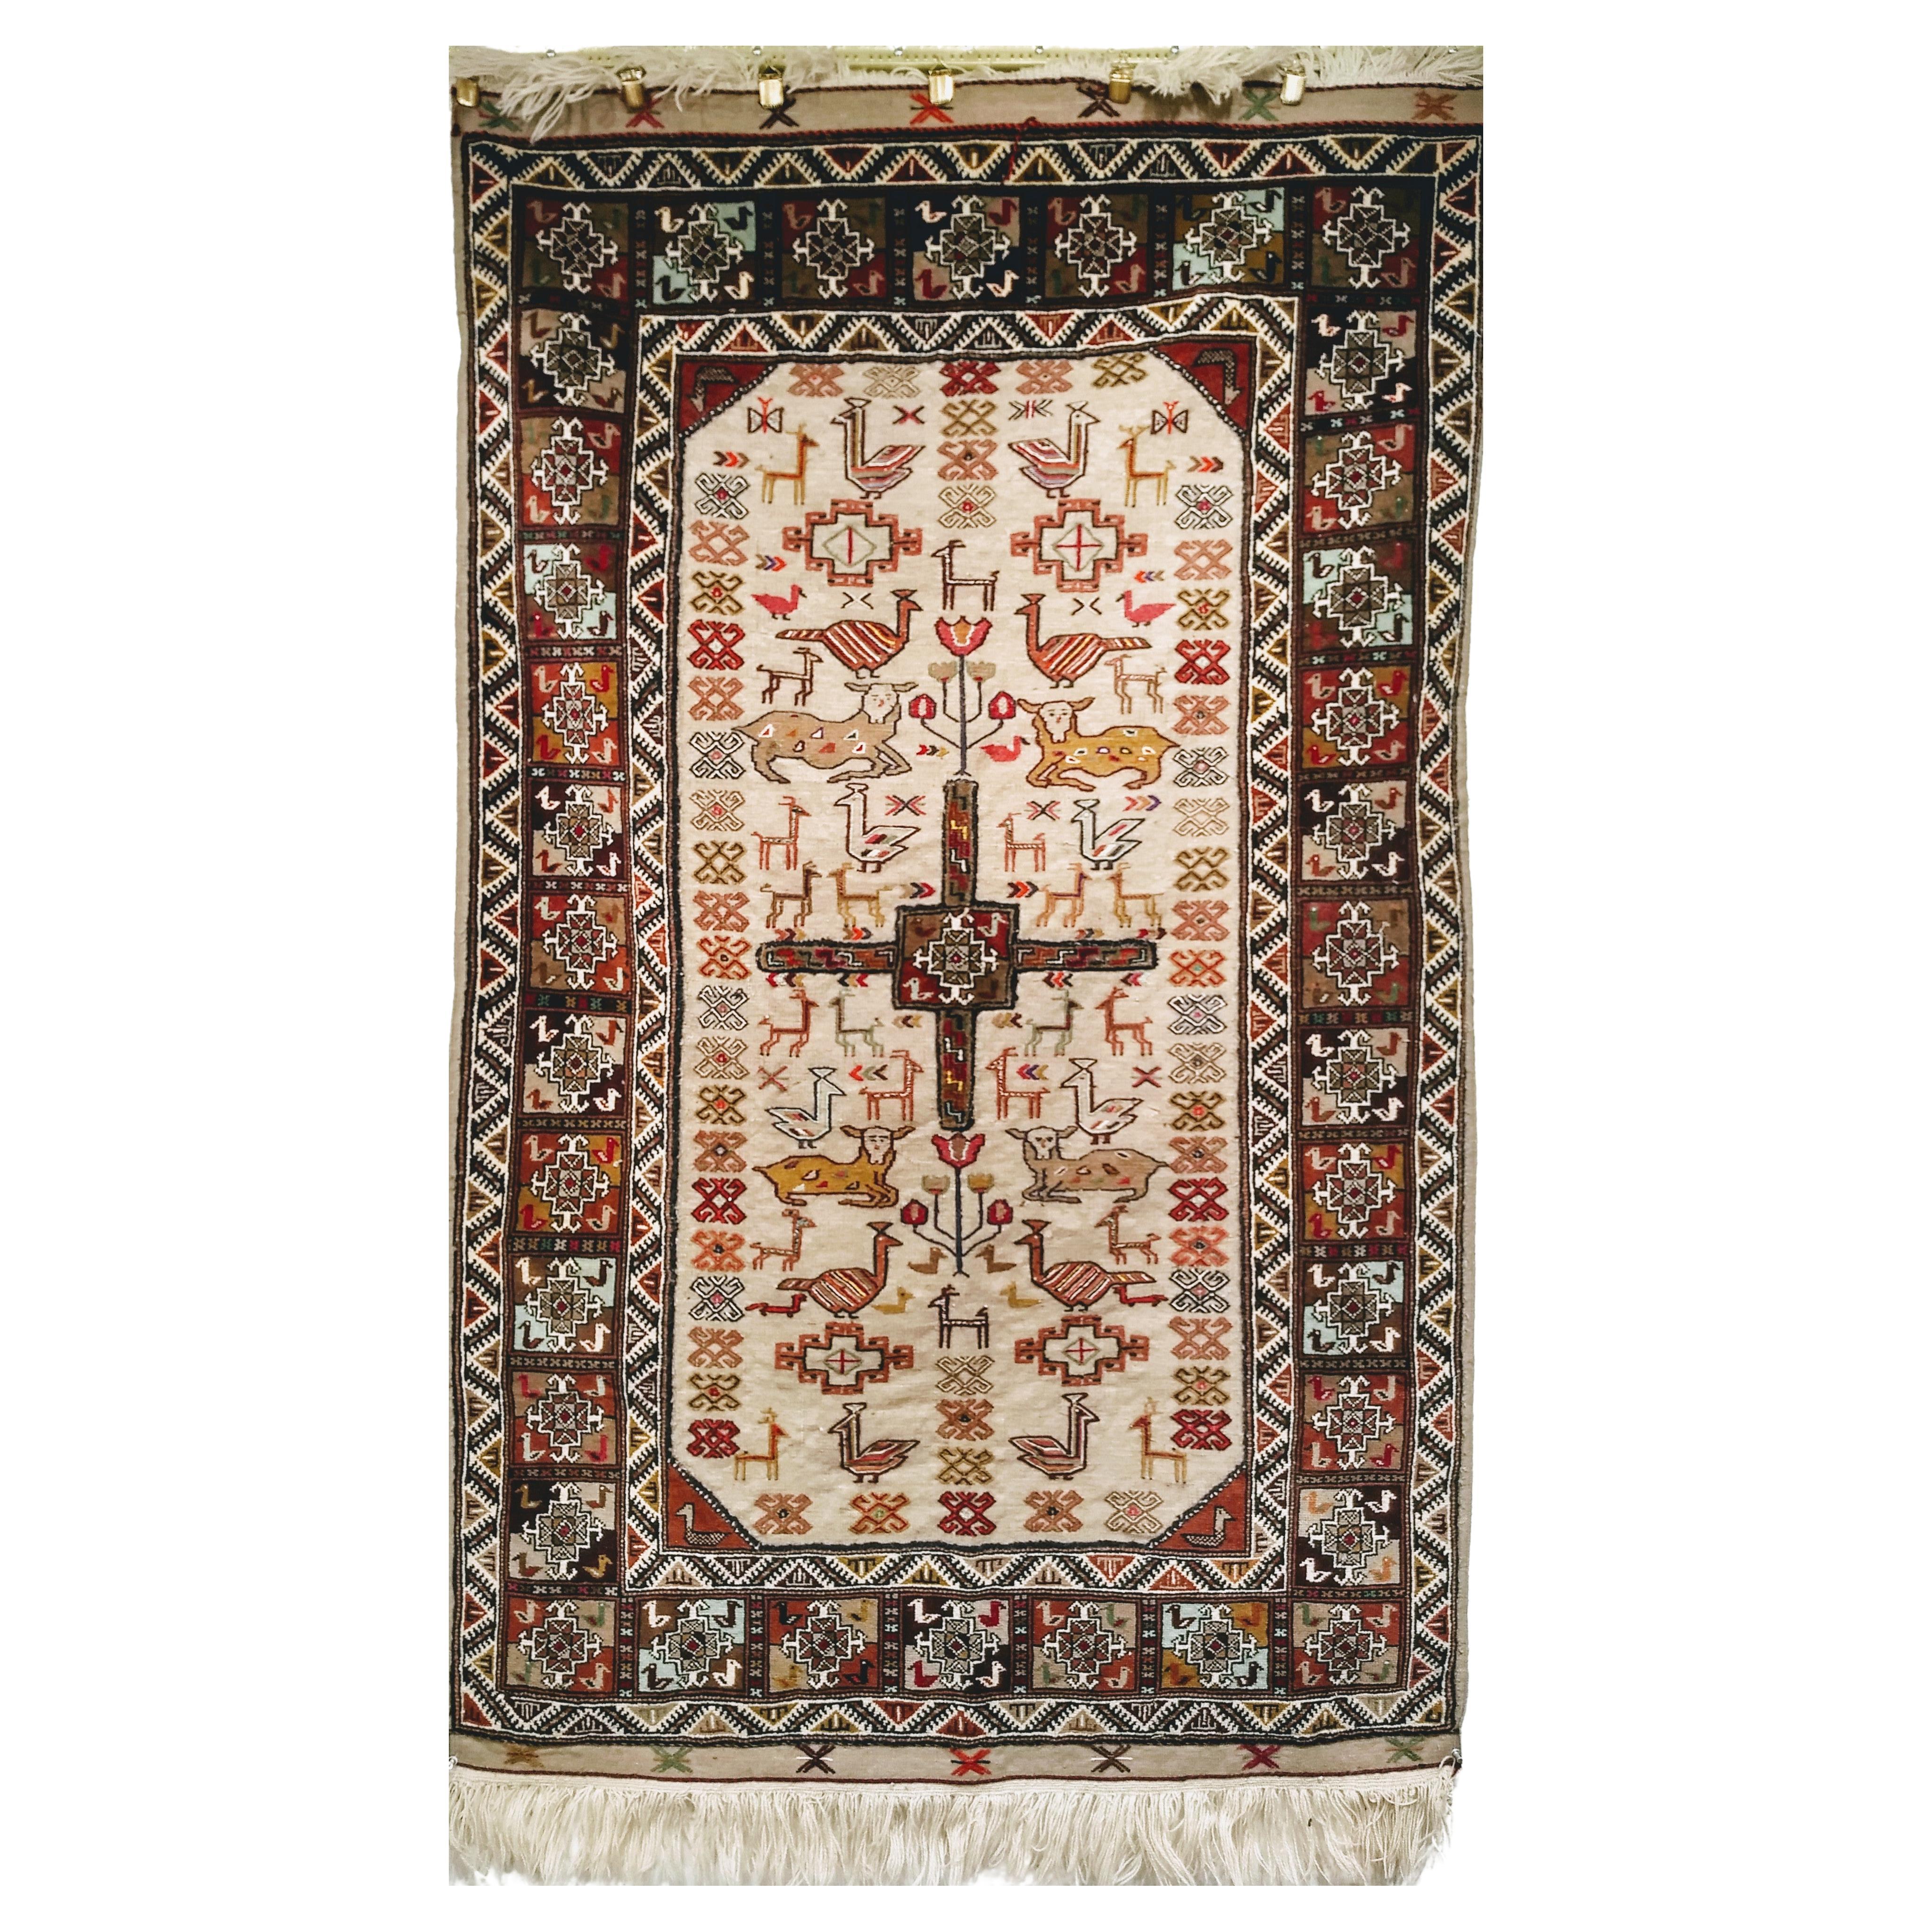 Vintage Hand-Woven Persian Qashqai Tribal Tapestry in Tree of Life Pattern For Sale